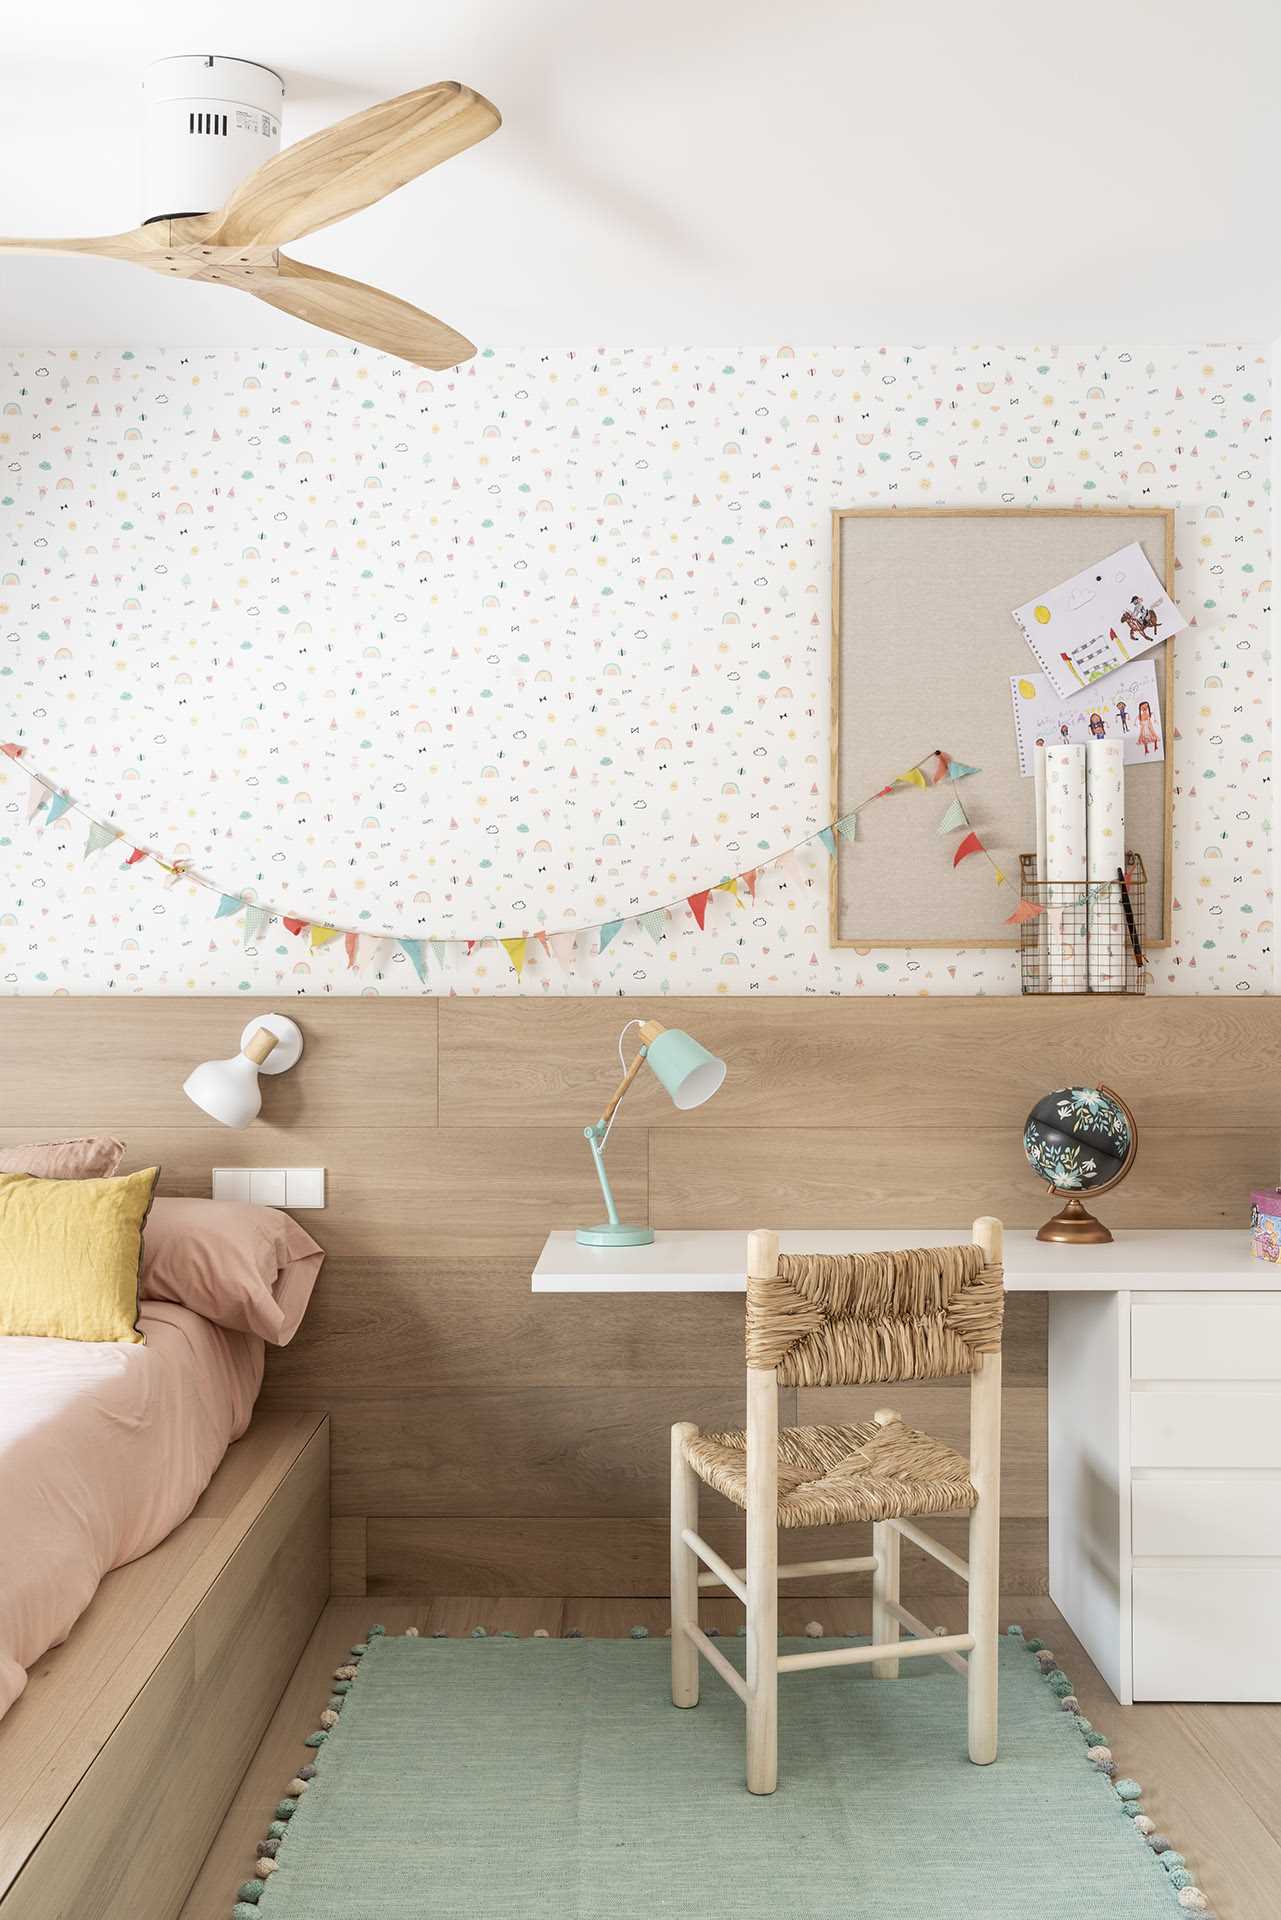 In this kids' bedroom, wallpaper and decorative accents add a fun pop of color.